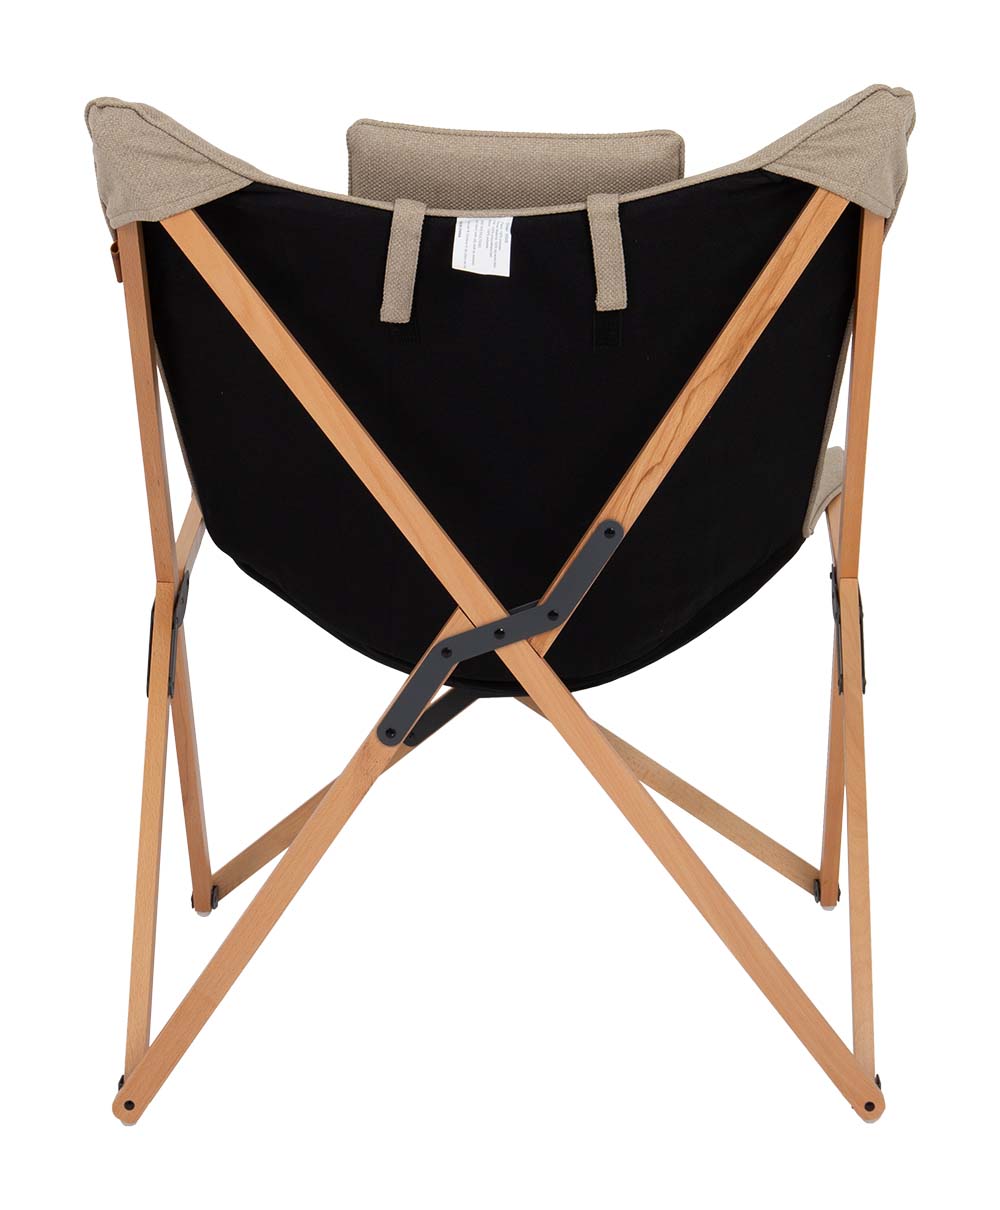 Bo-Camp - Urban Outdoor collection - Relaxsessel - Wembley - L - Nika - Beige detail 6